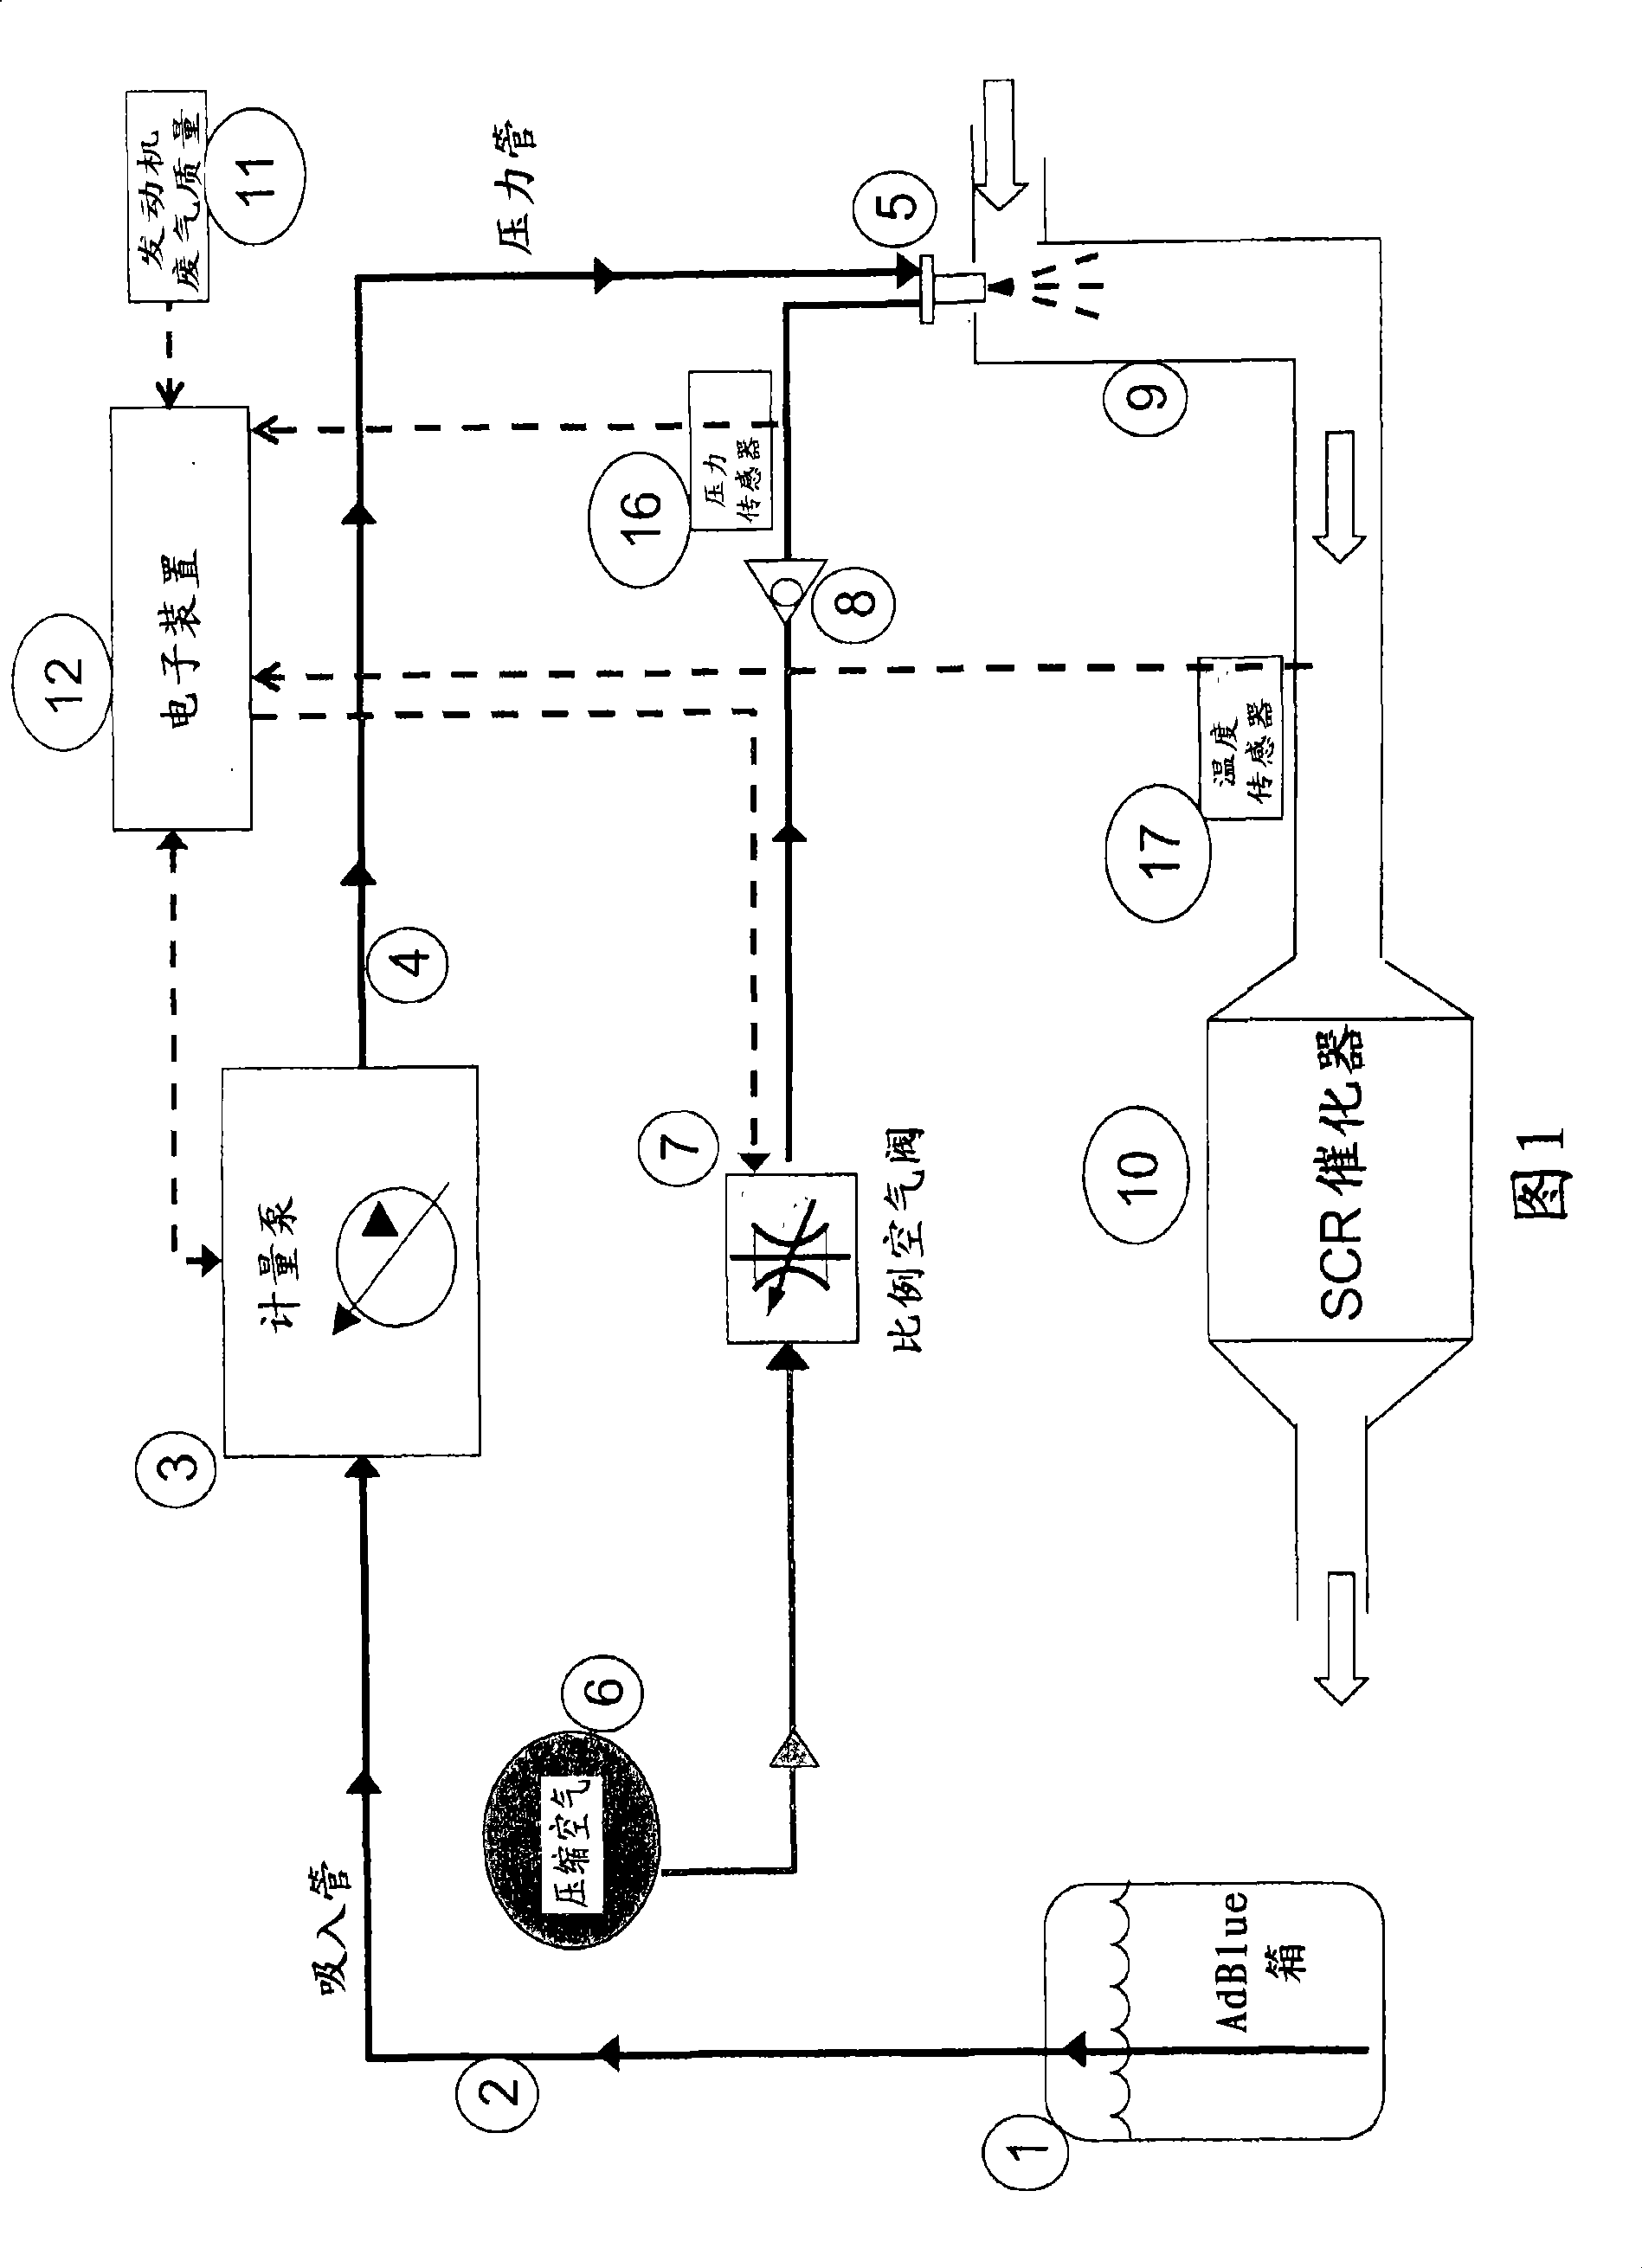 Measurement system for spraying urea liquid into exhaust flow in combustion engine